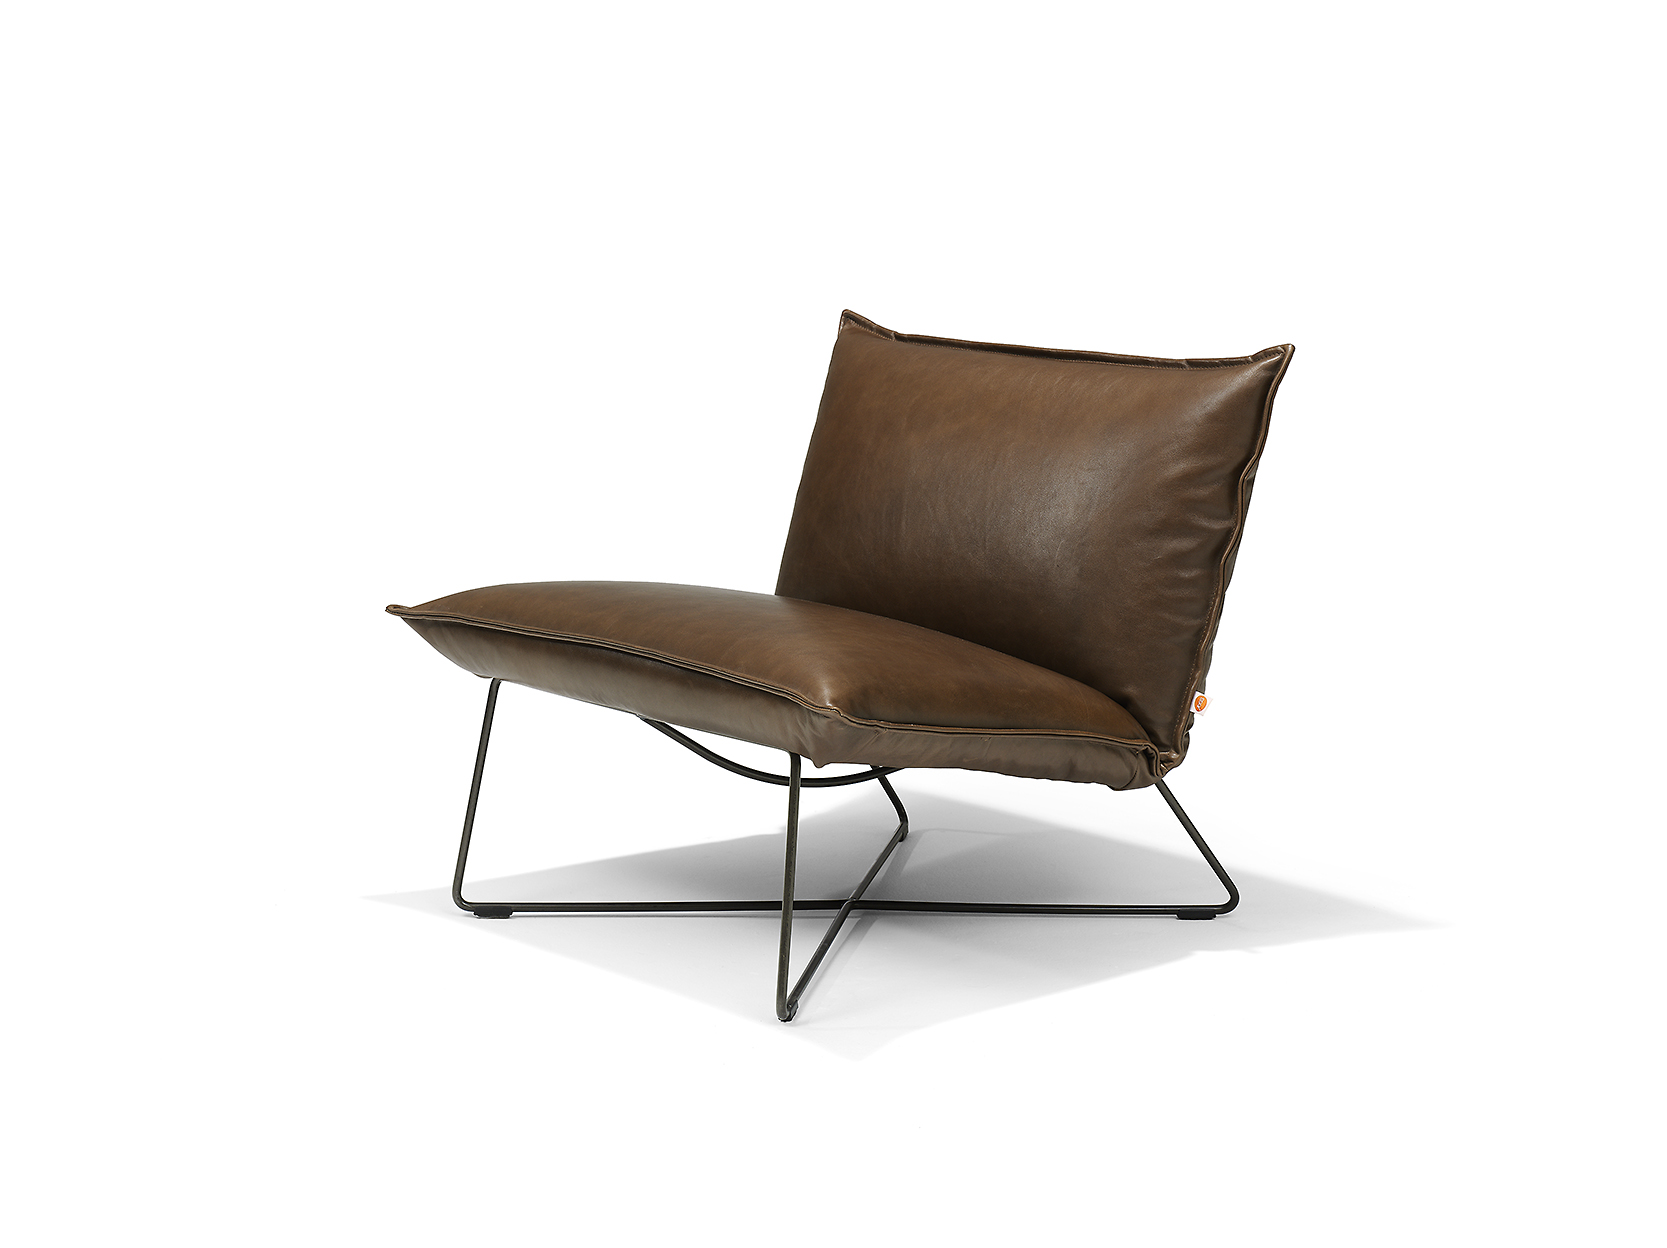 Earl Lounge Chair Without Arm Luxor Fango Pers LR